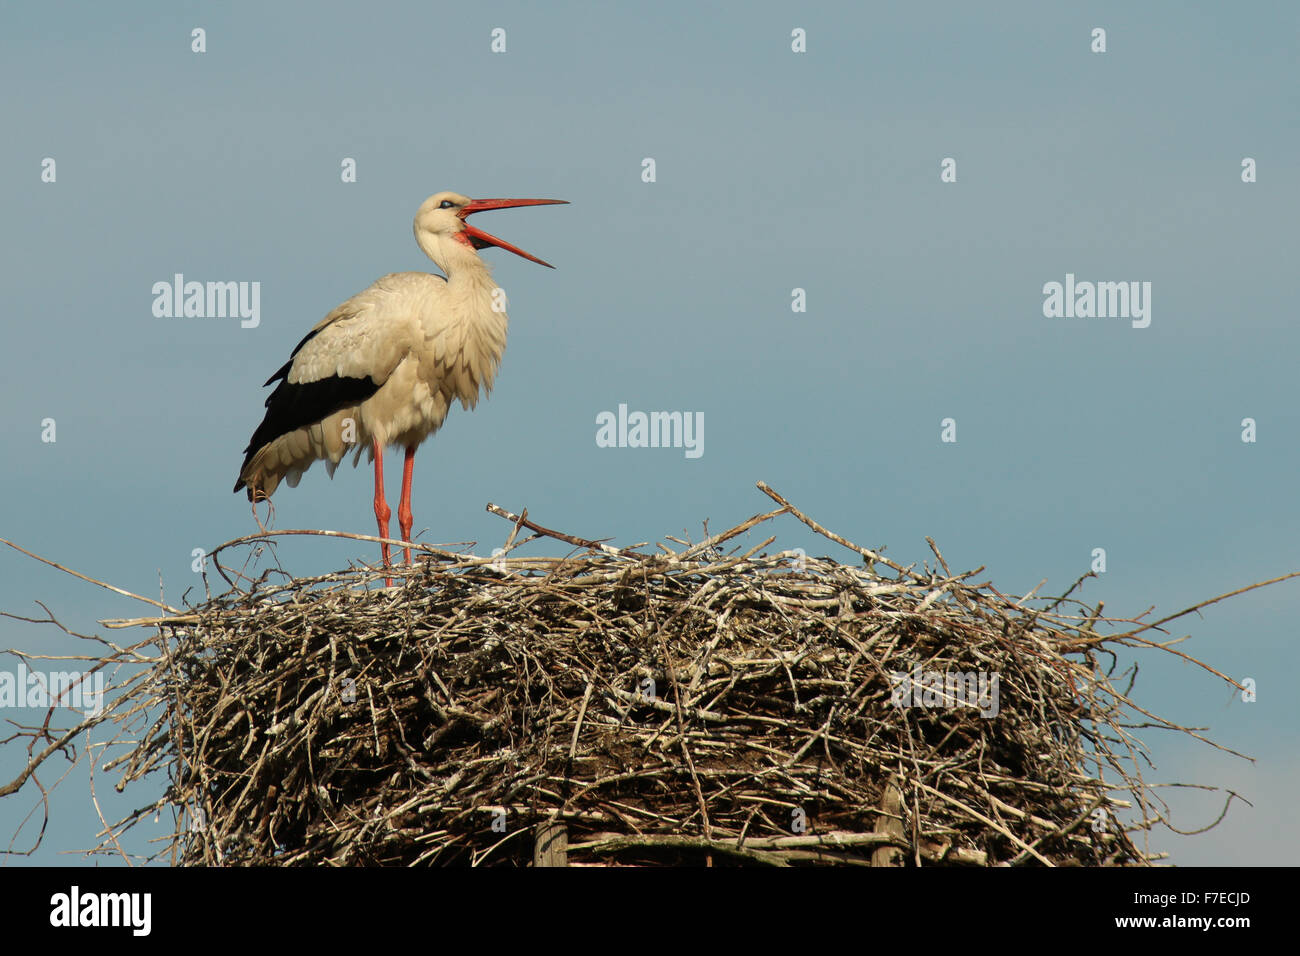 White stork (Ciconia ciconia) standing in its nest, Minden-Lübbecke district, North Rhine-Westphalia, Germany Stock Photo